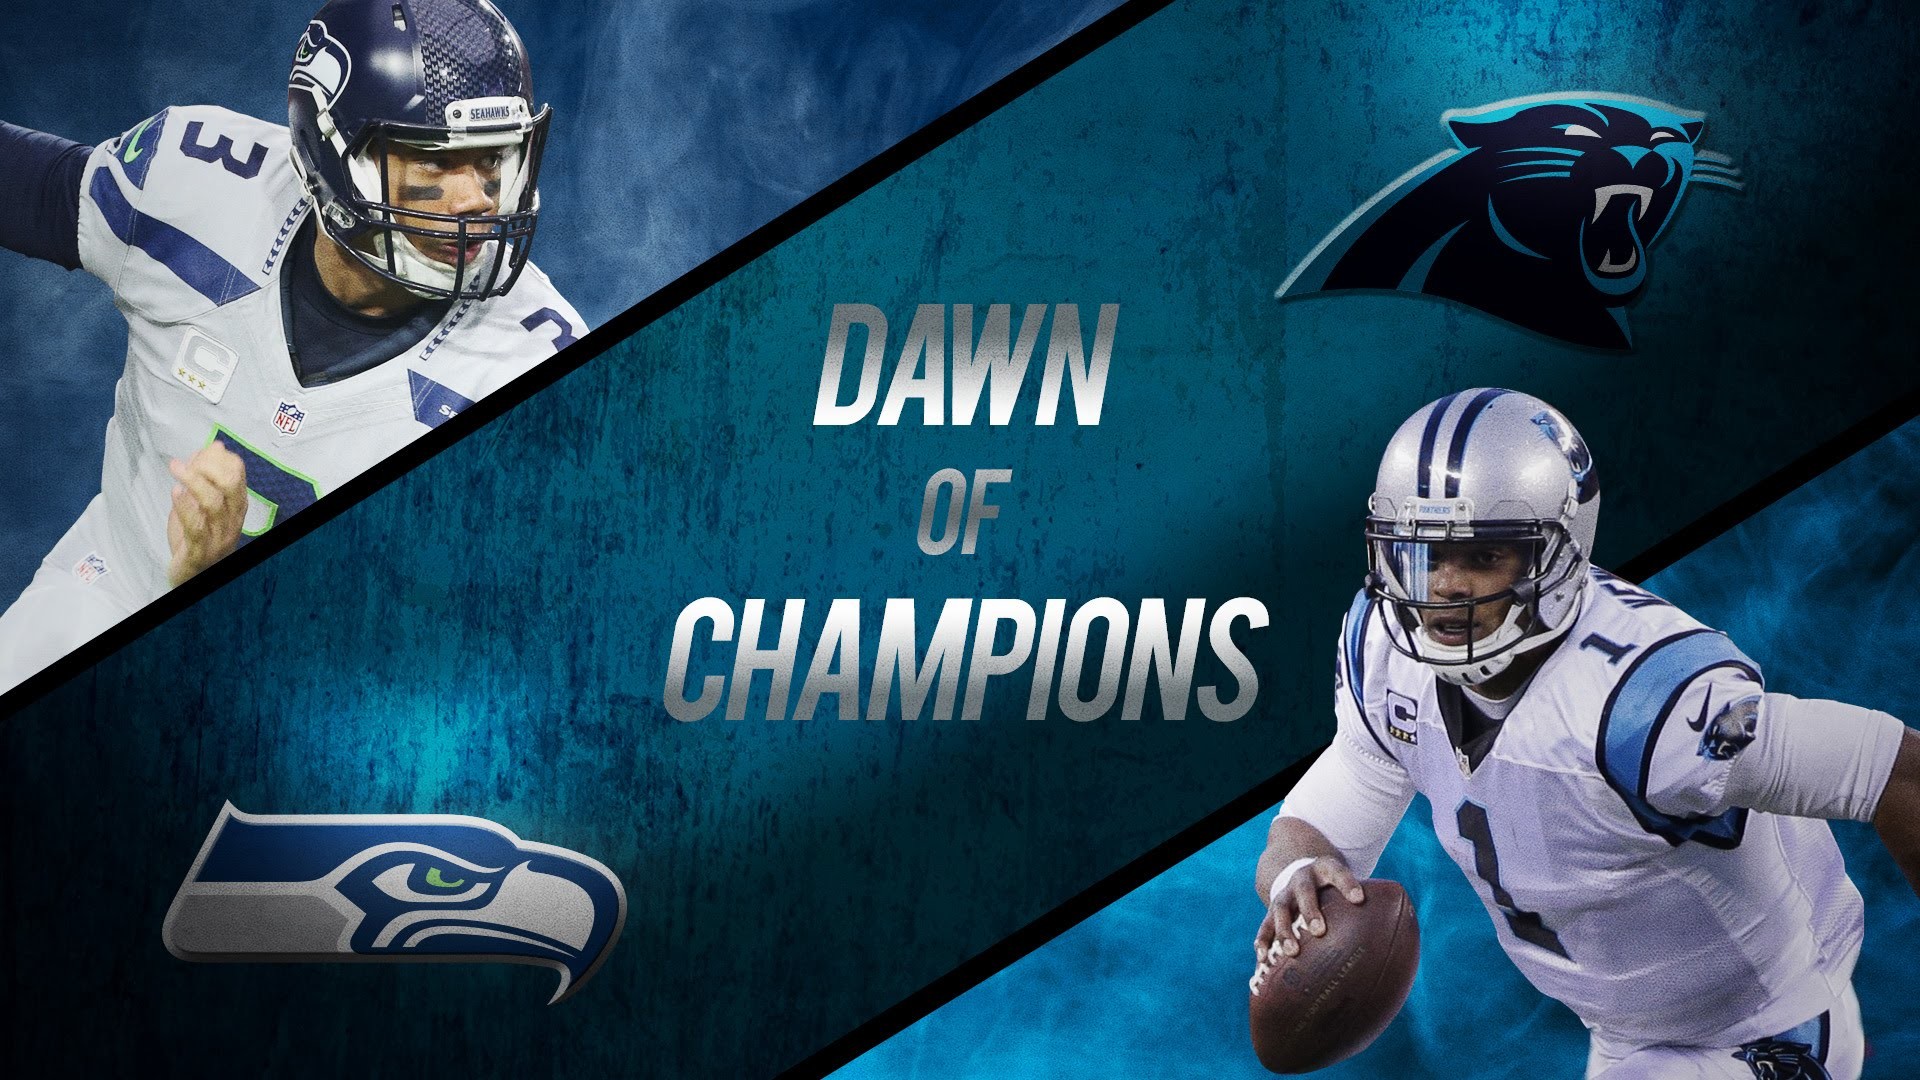 1920x1080 Dawn of Champions: Russell Wilson vs. Cam Newton | Seahawks vs. Panthers  Playoff Movie Trailer - YouTube